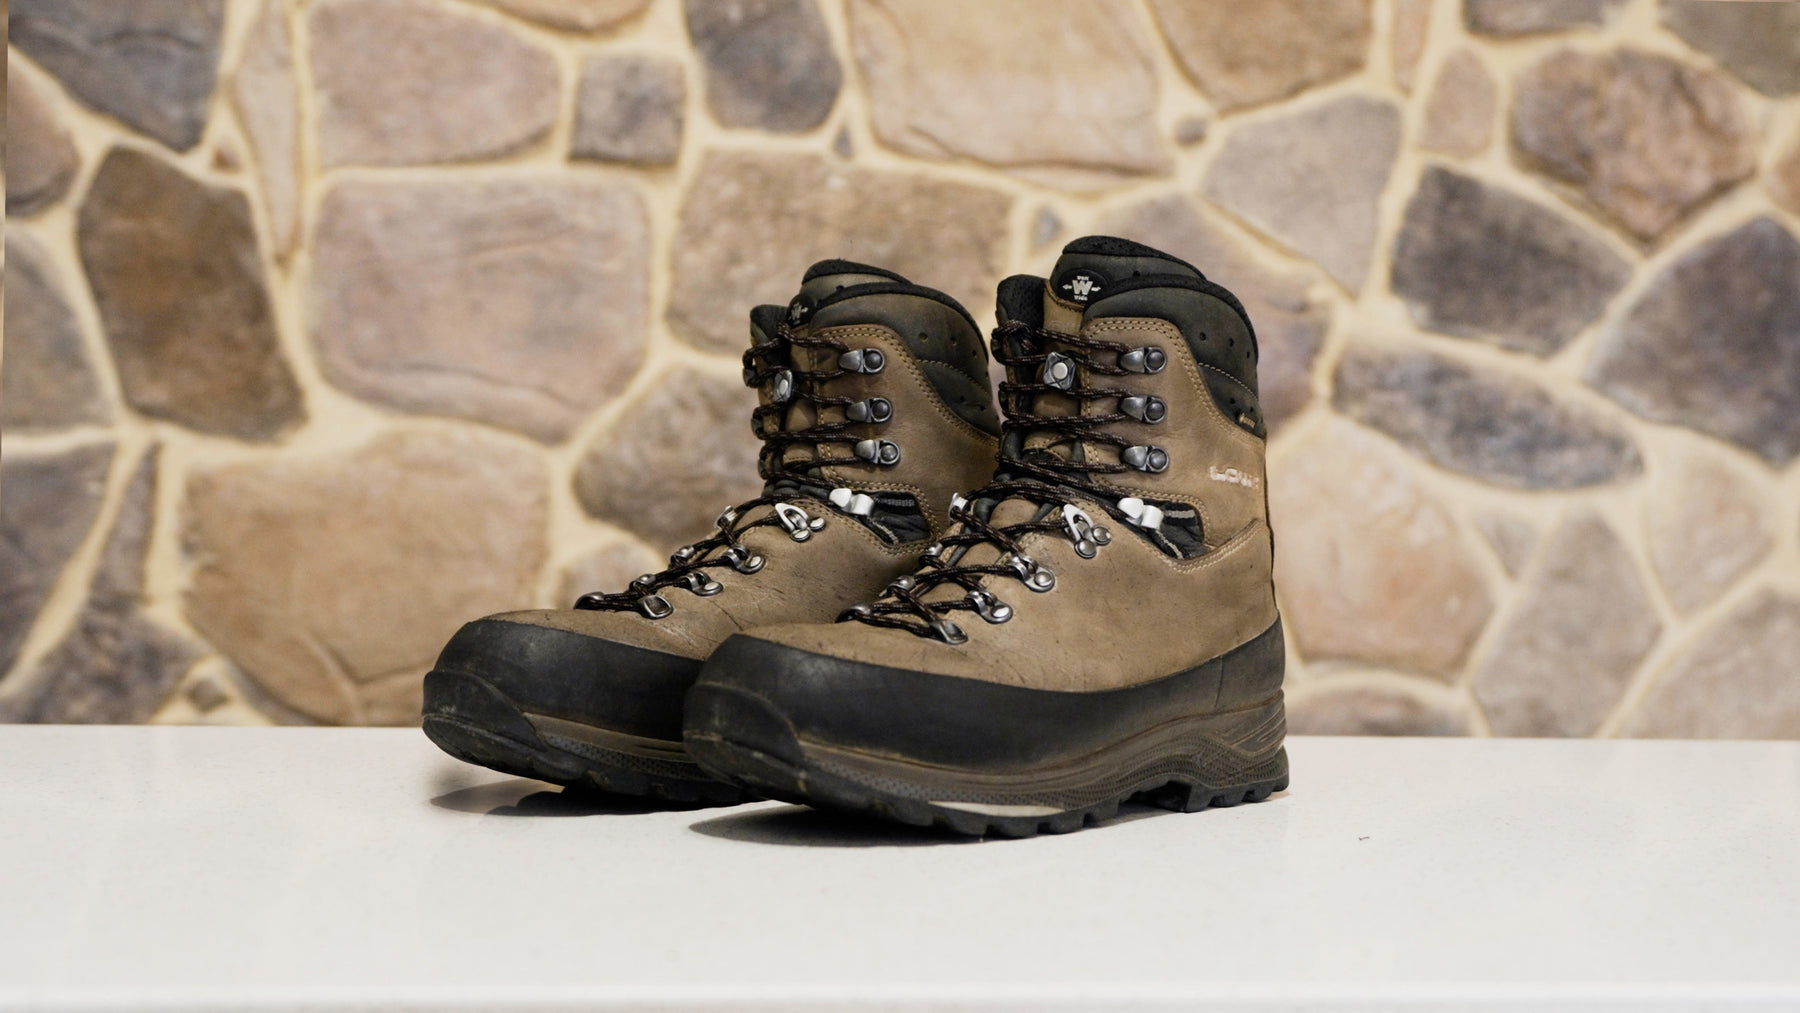 How to Clean your Hiking Boots | Condition and Re-Waterproof | Prolong the Life of Your Boots